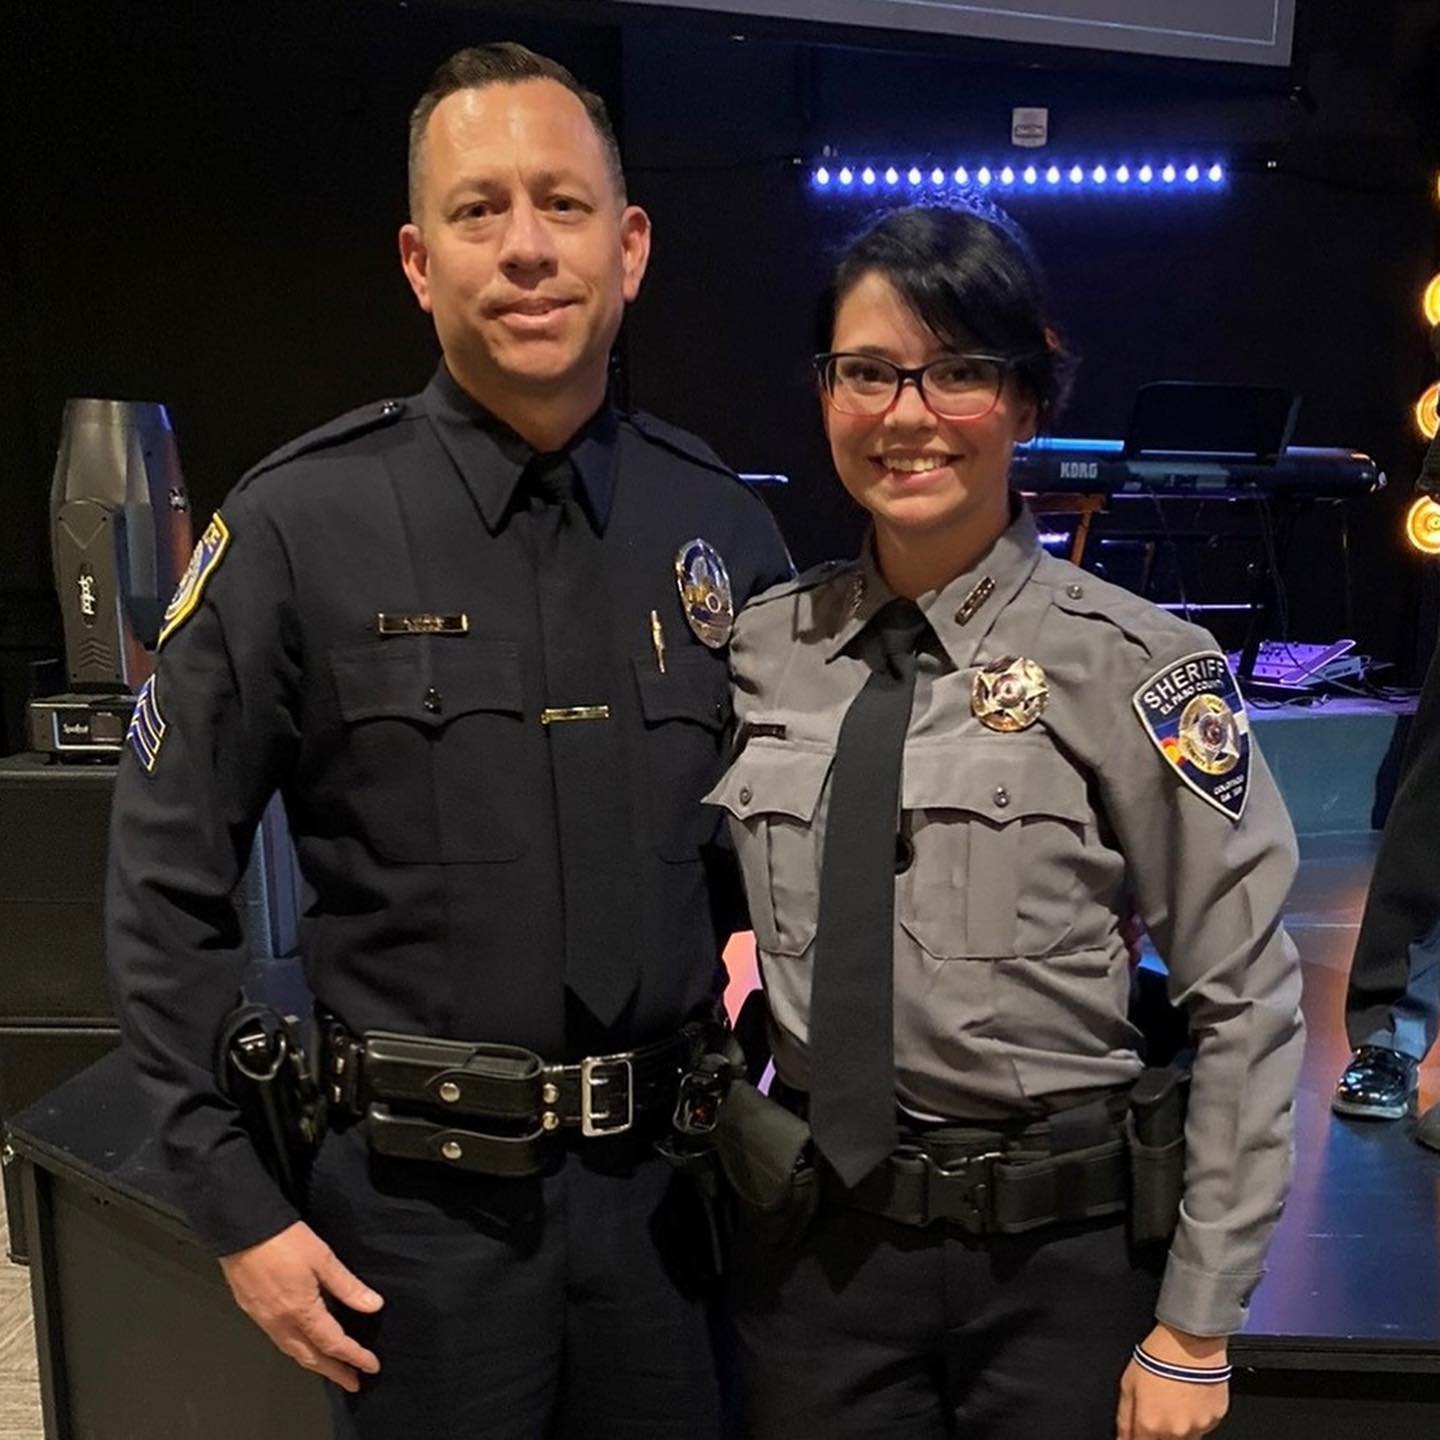 Escondido police Sgt. Jeff Valdivia with Dep. Natalie Young. (Courtesy of El Paso County Sheriff’s Office)